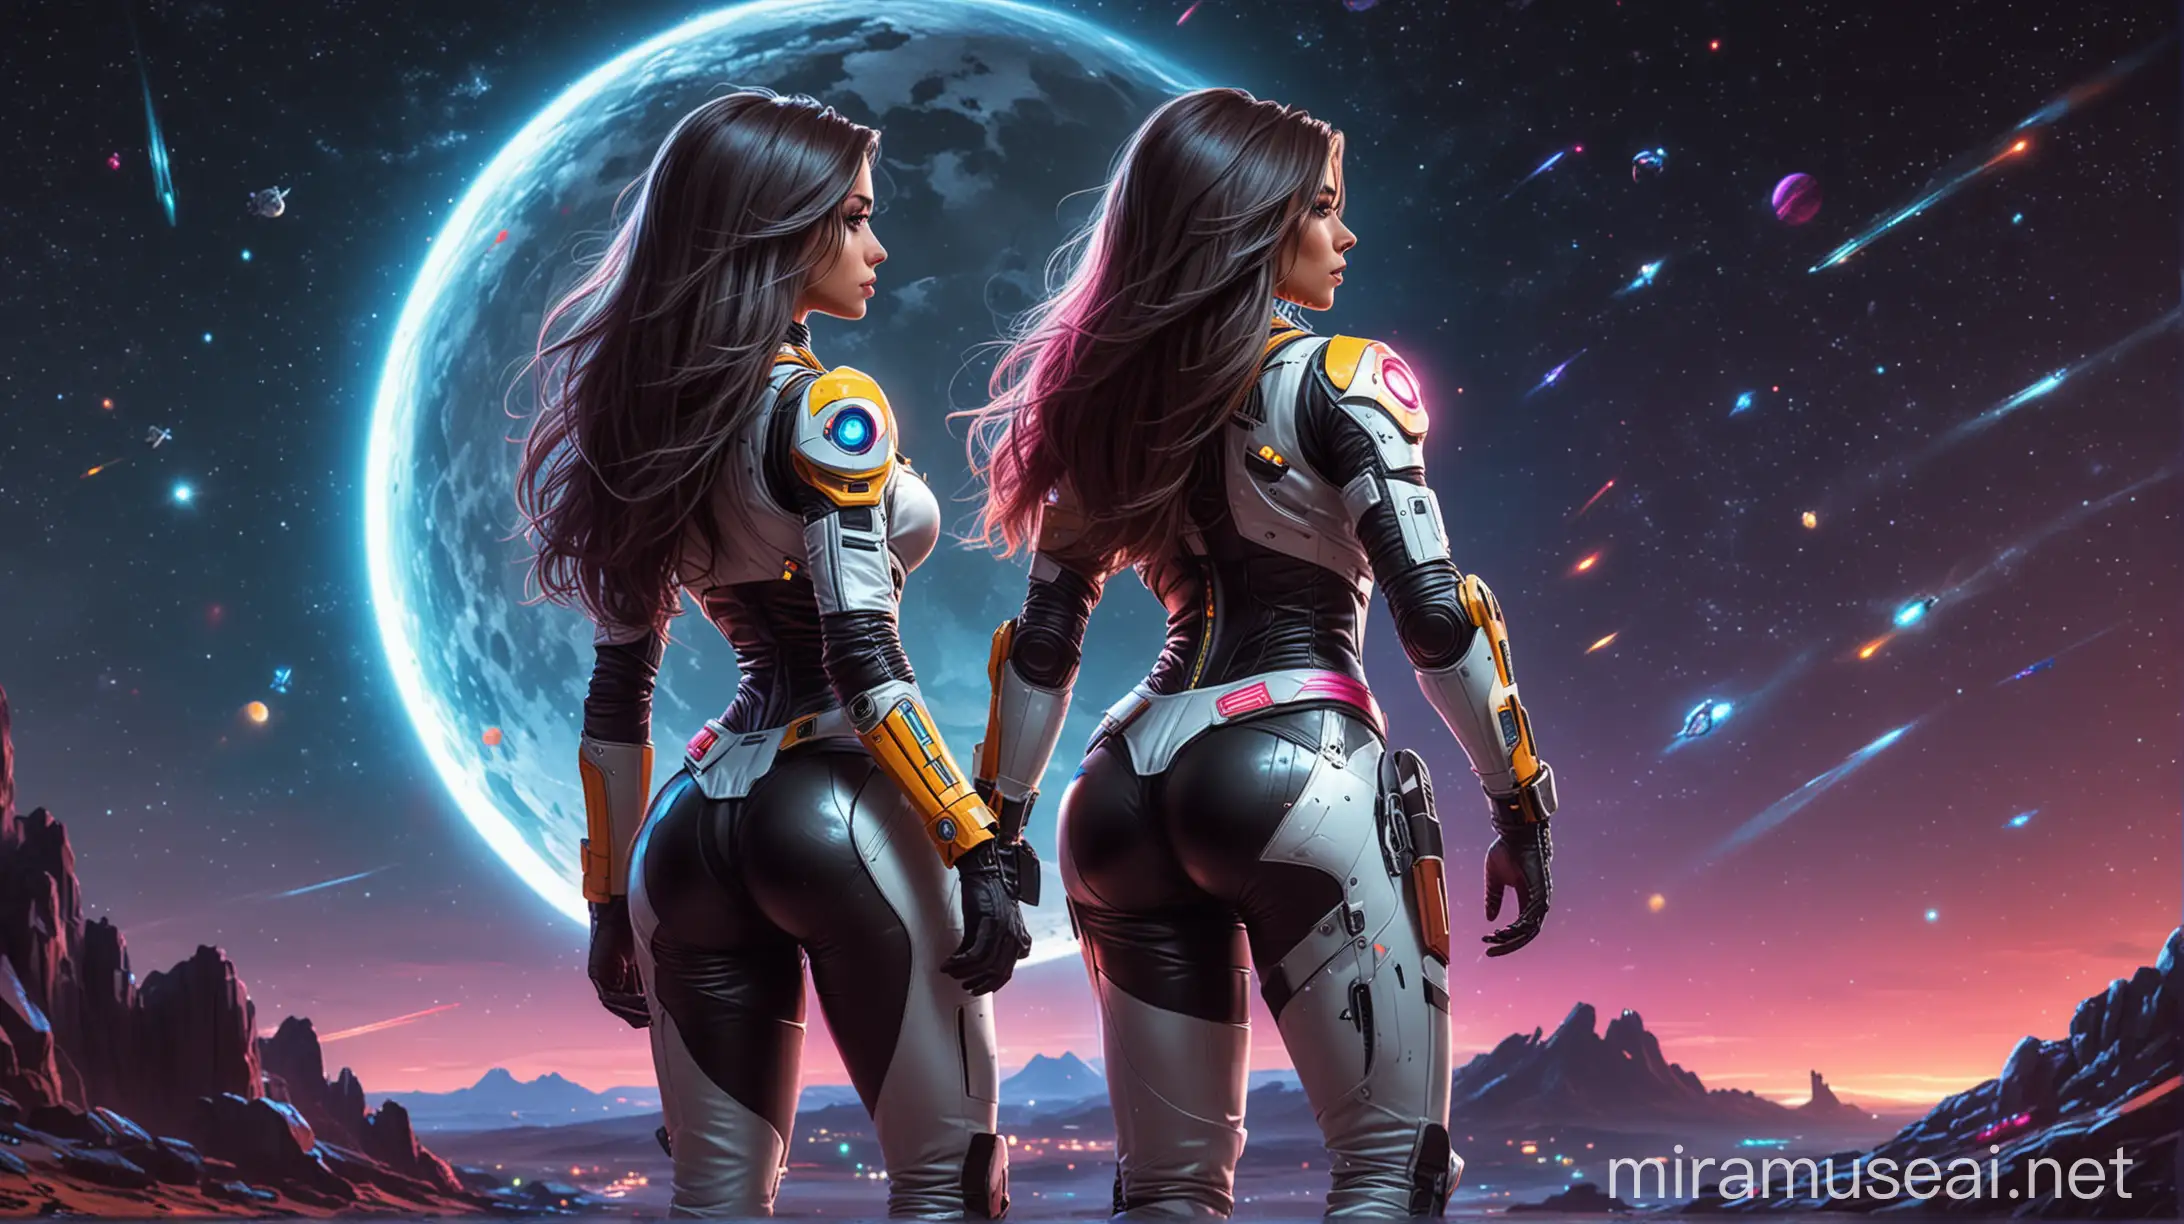 cartoon style, spanish slim finess model girl, sexy round ass, heroic pose from behind, wild long modern hair style, tight heavily armored spacesuit, black and white spacesuit, colorful neon glowing spacesuit, belt with pouches, colorful night sky, giant sci-fi spaceship